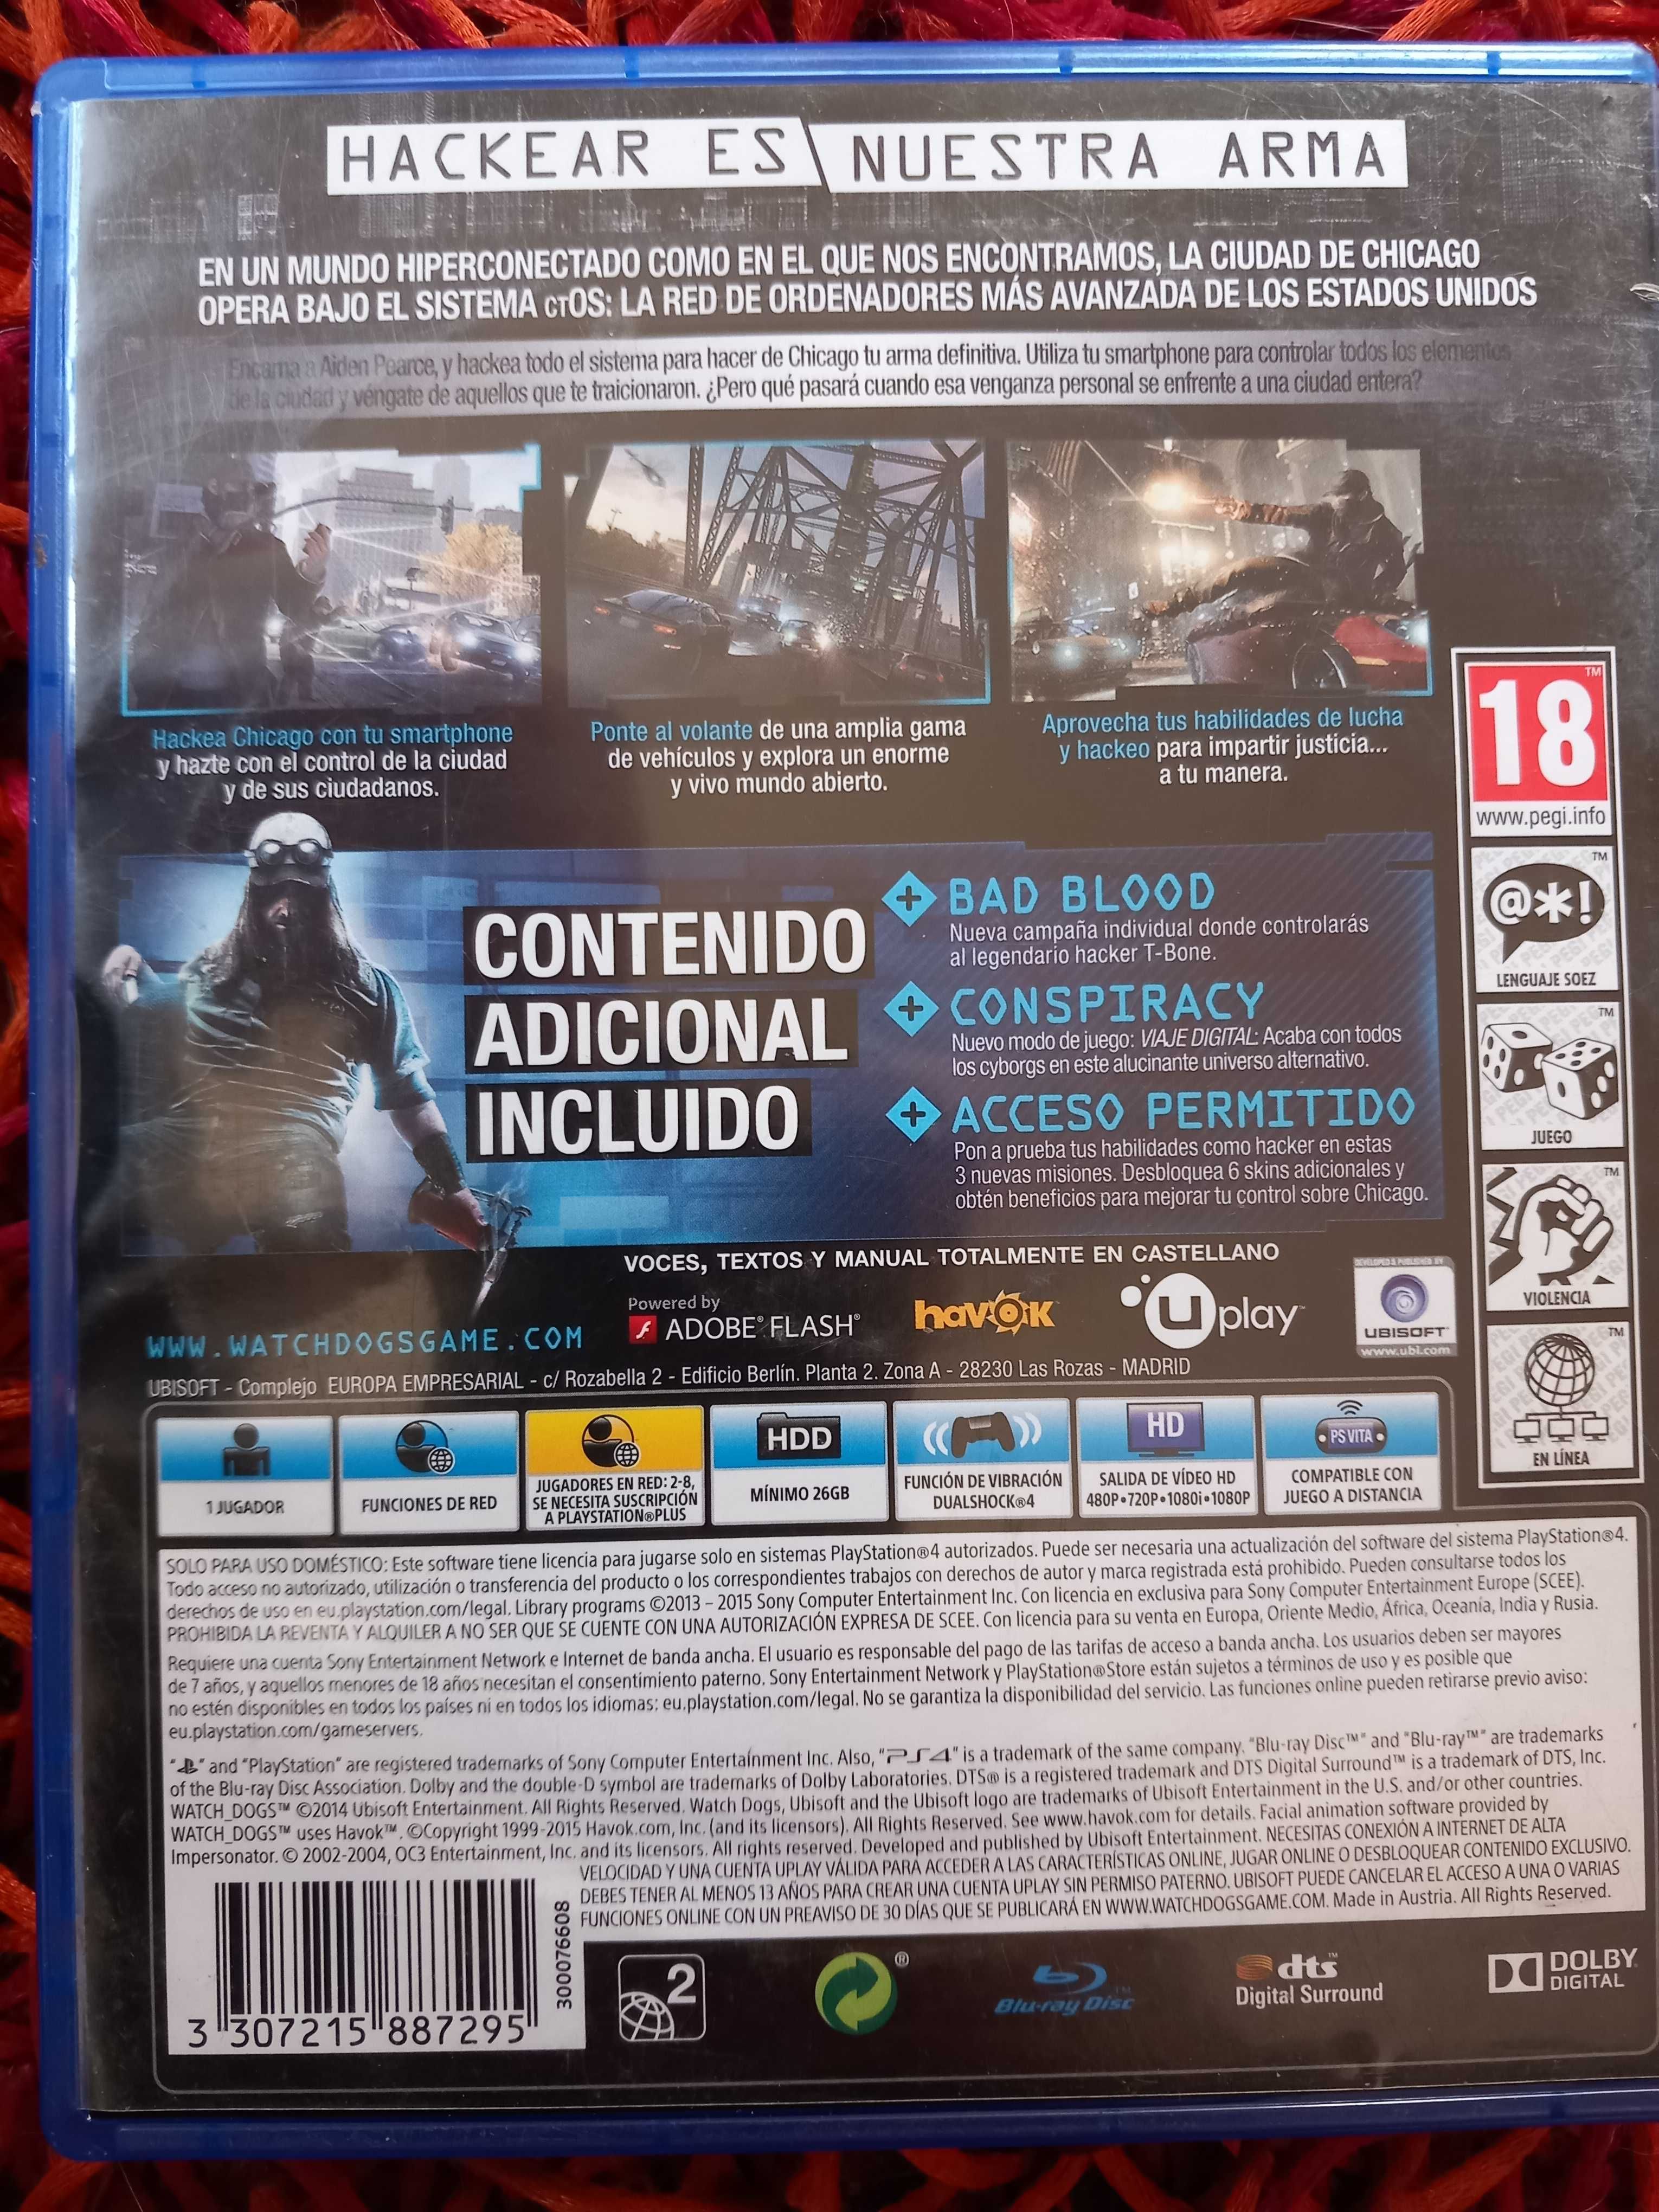 Watch Dogs Completed Edition Ps4